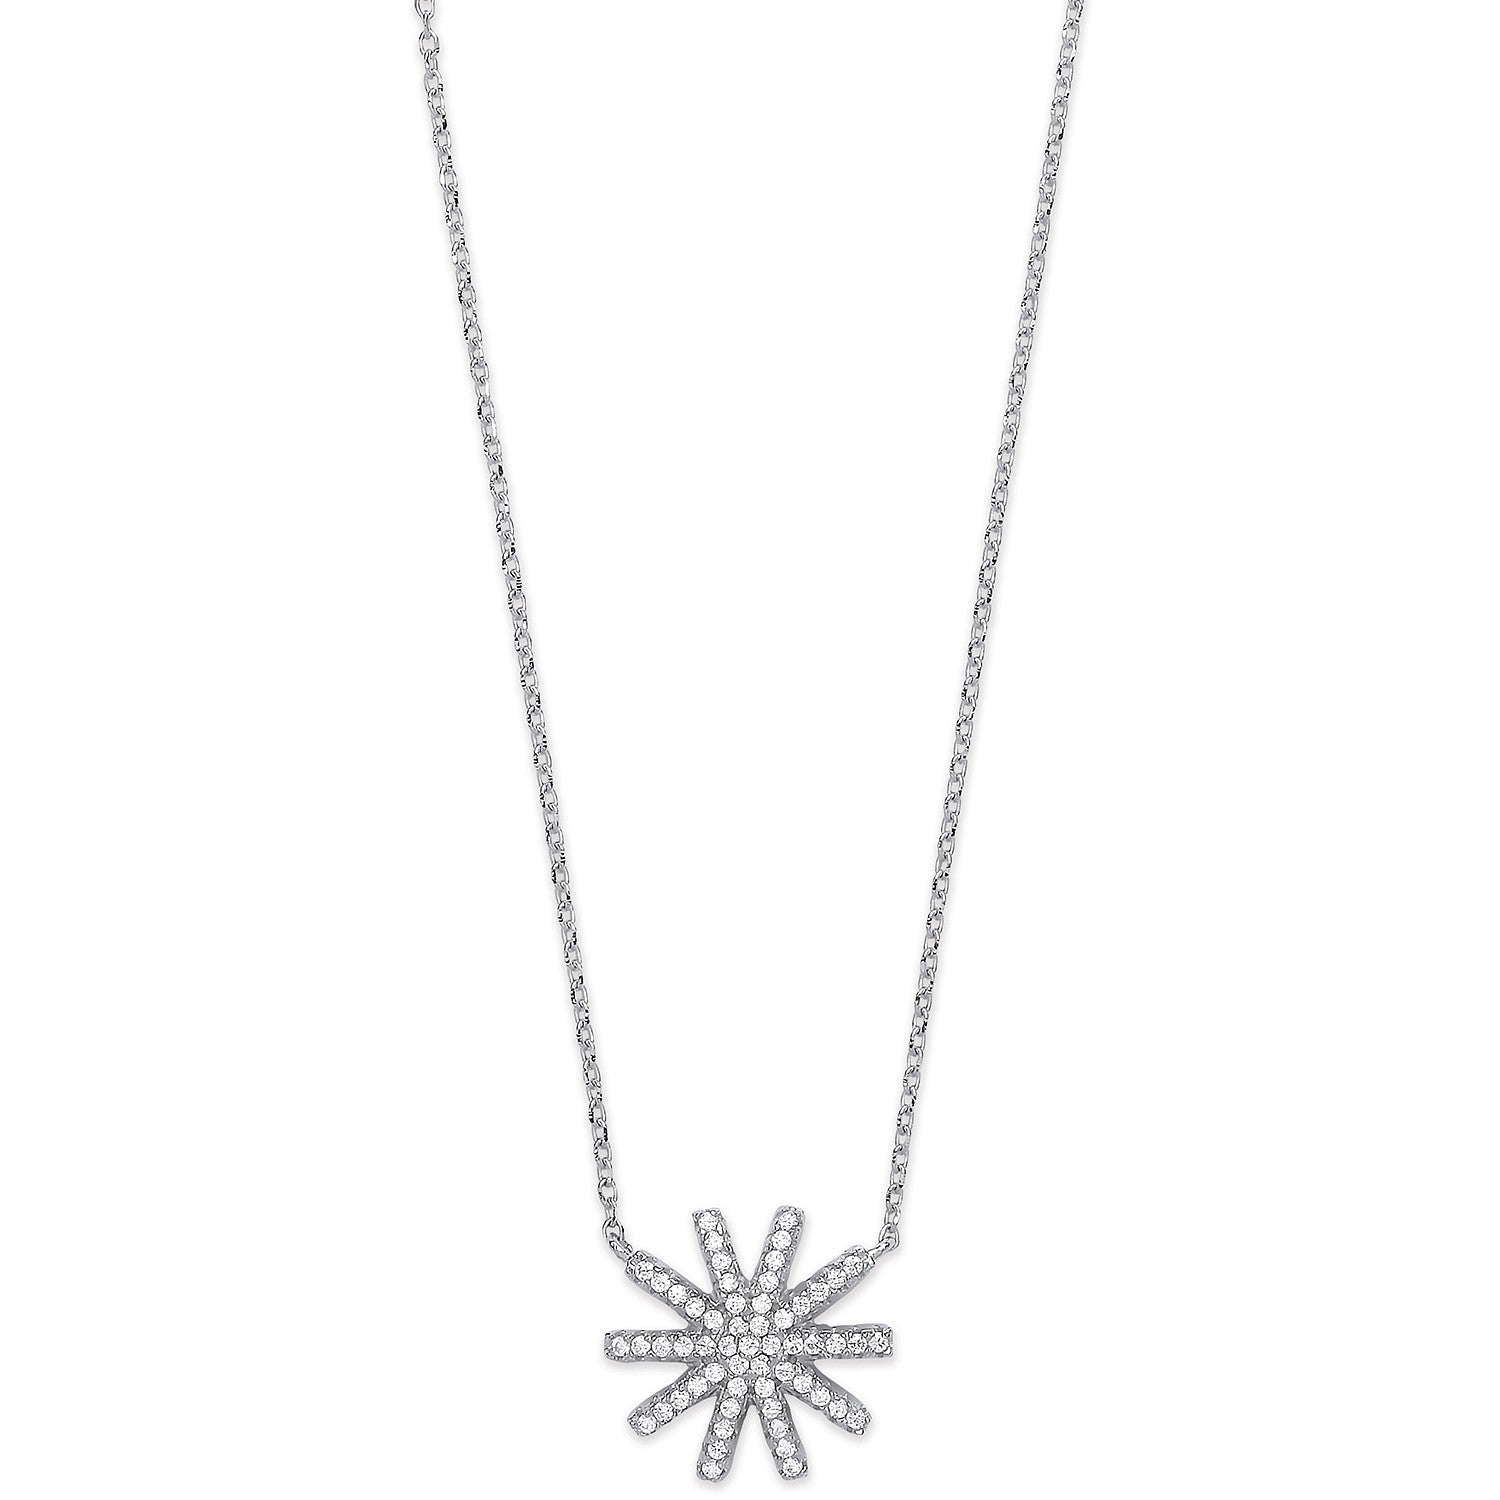 925 Sterling Silver Cz Starburst Pendant 16" Necklace with extension - FJewellery